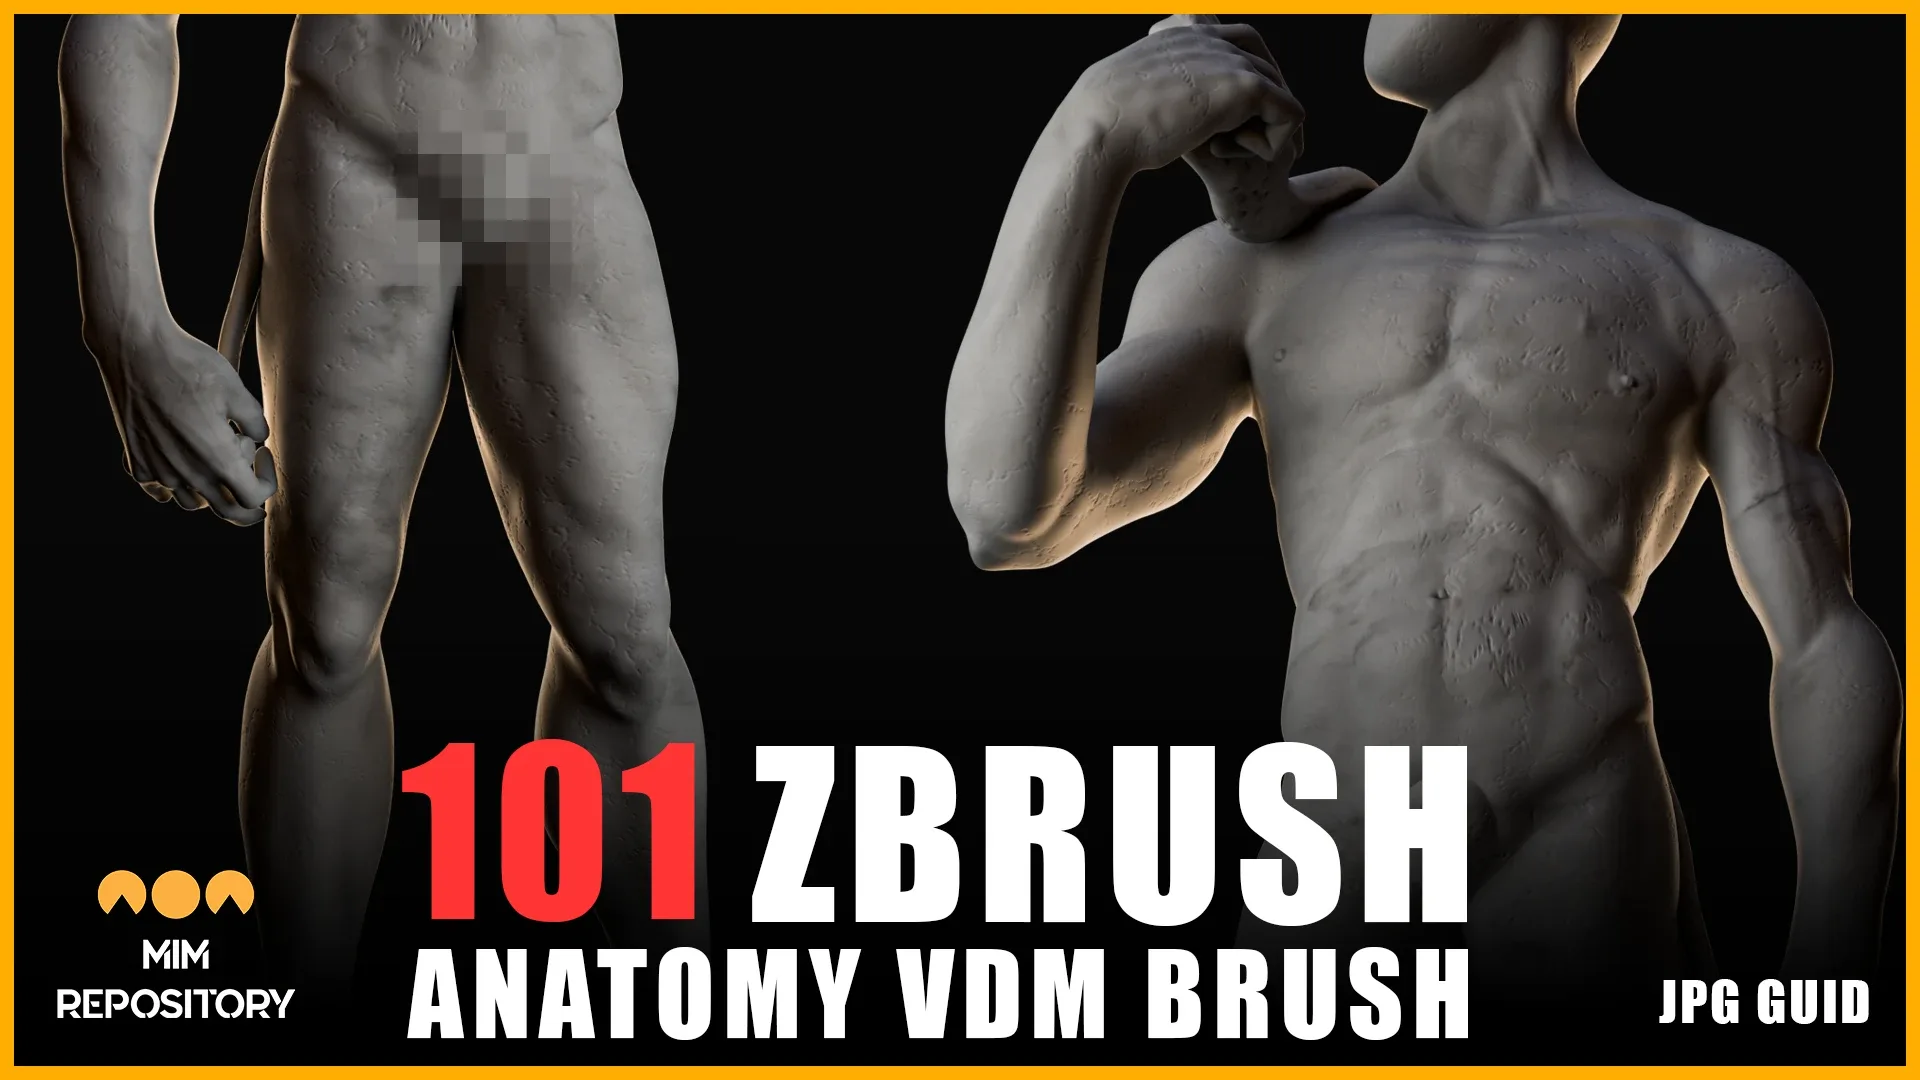 101 Anatomy VDM Brush - Body Parts and Muscles